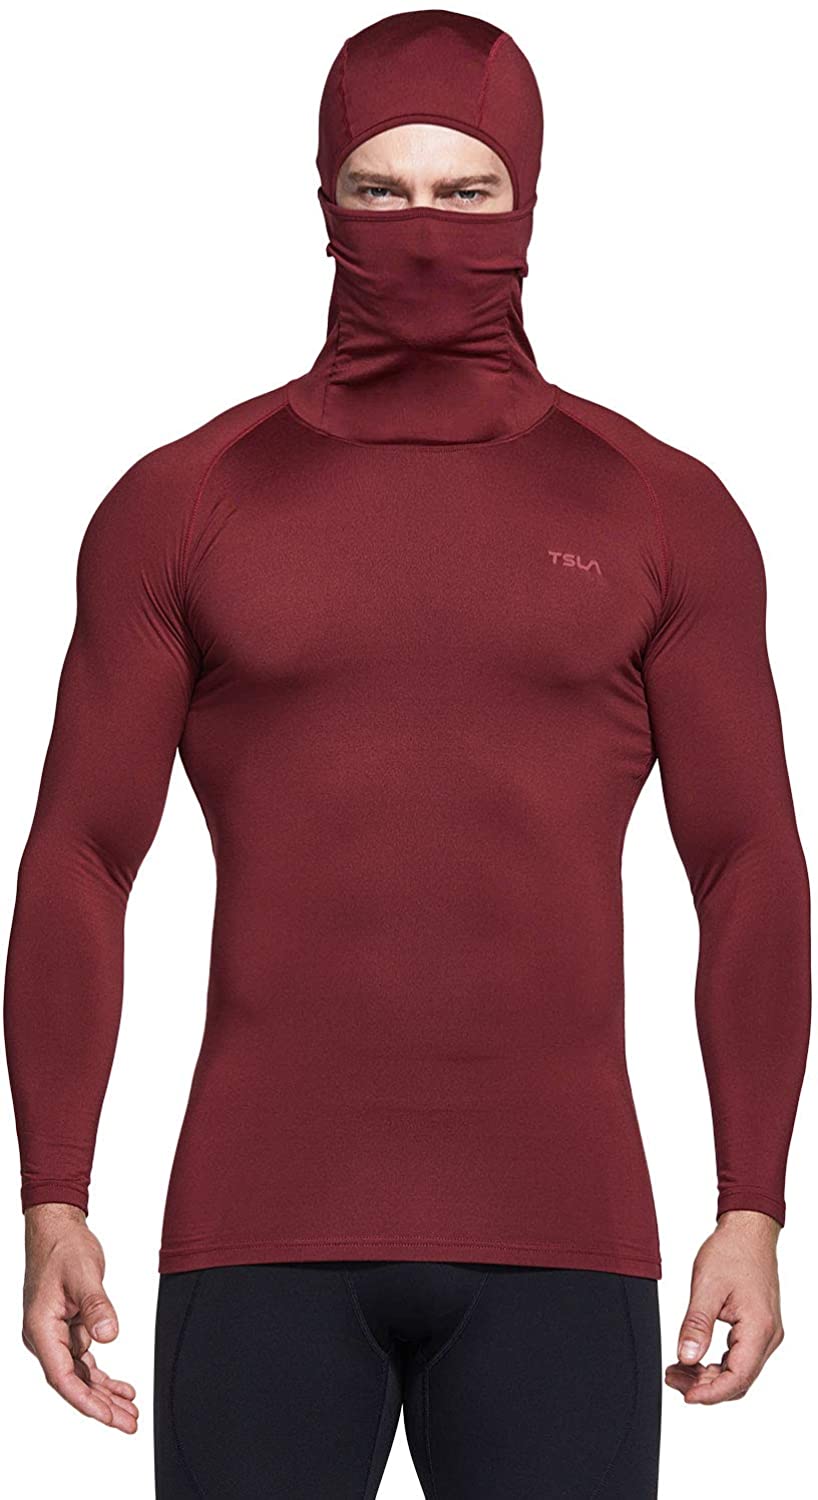  TSLA Men's Thermal V-Neck Long Sleeve Compression Shirts,  Athletic Base Layer Top, Winter Gear Running T-Shirt, Heatlock V Neck  Black, Small : Clothing, Shoes & Jewelry